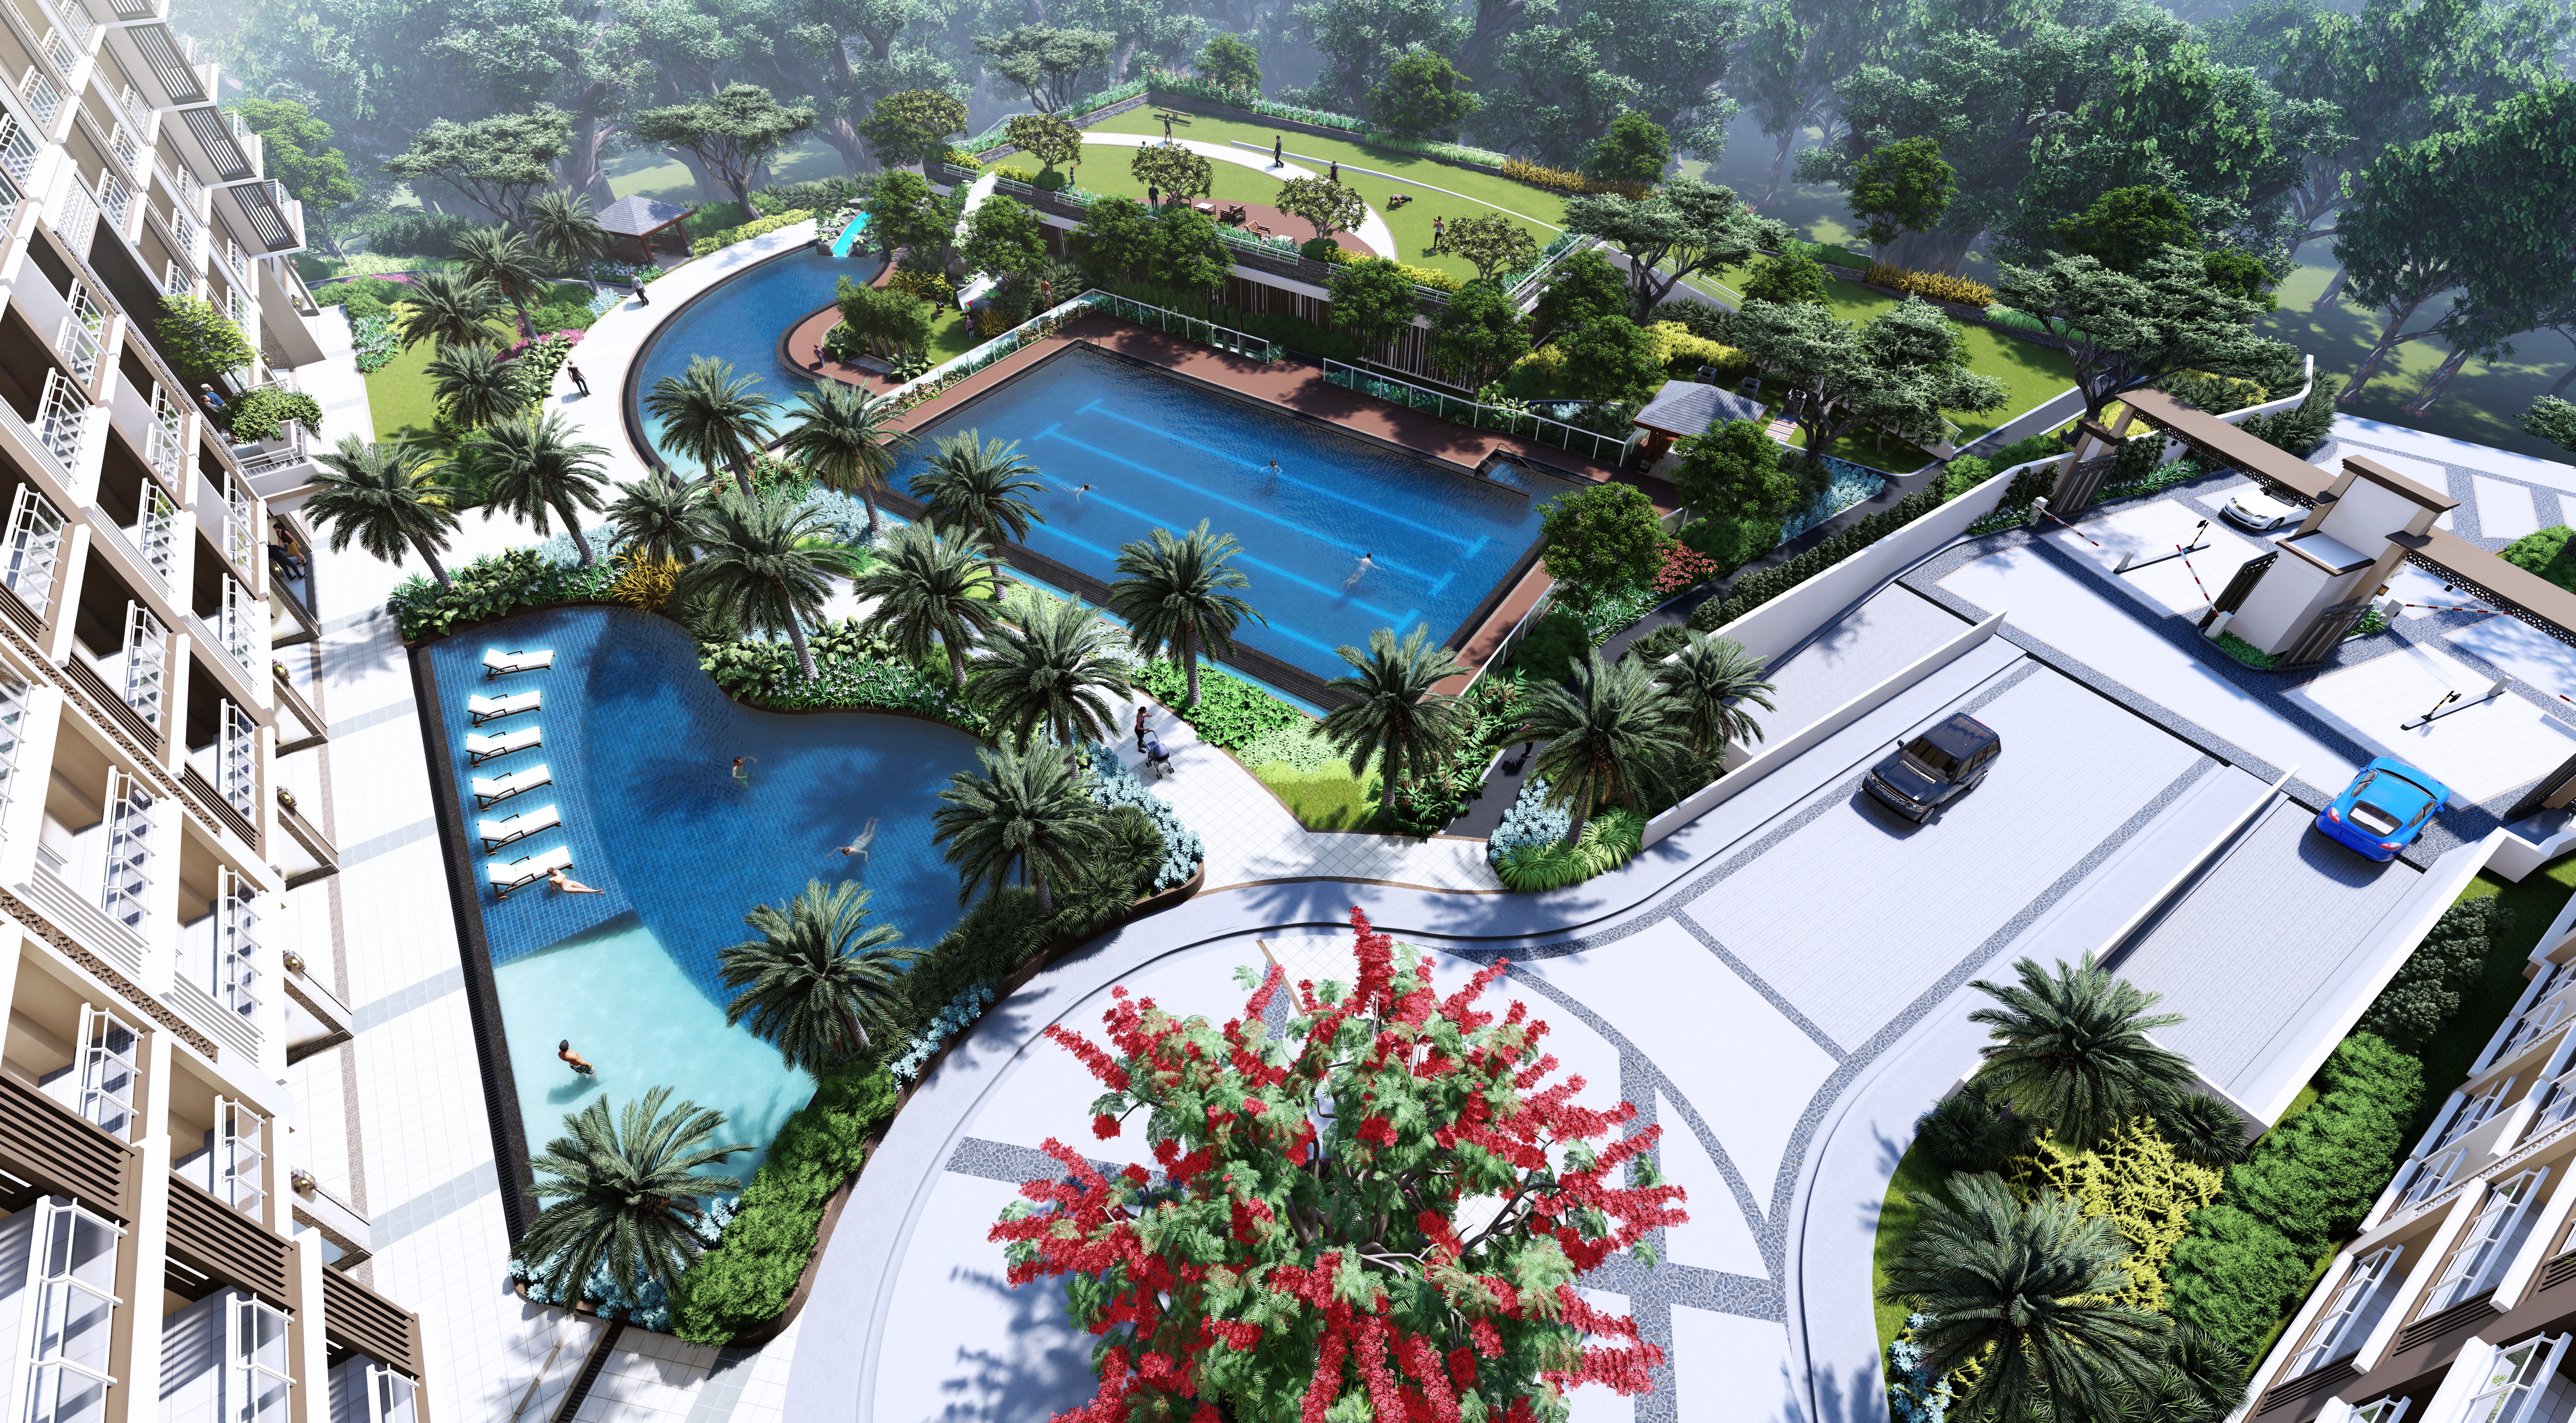 Swimming pools at Allegra Garden Place